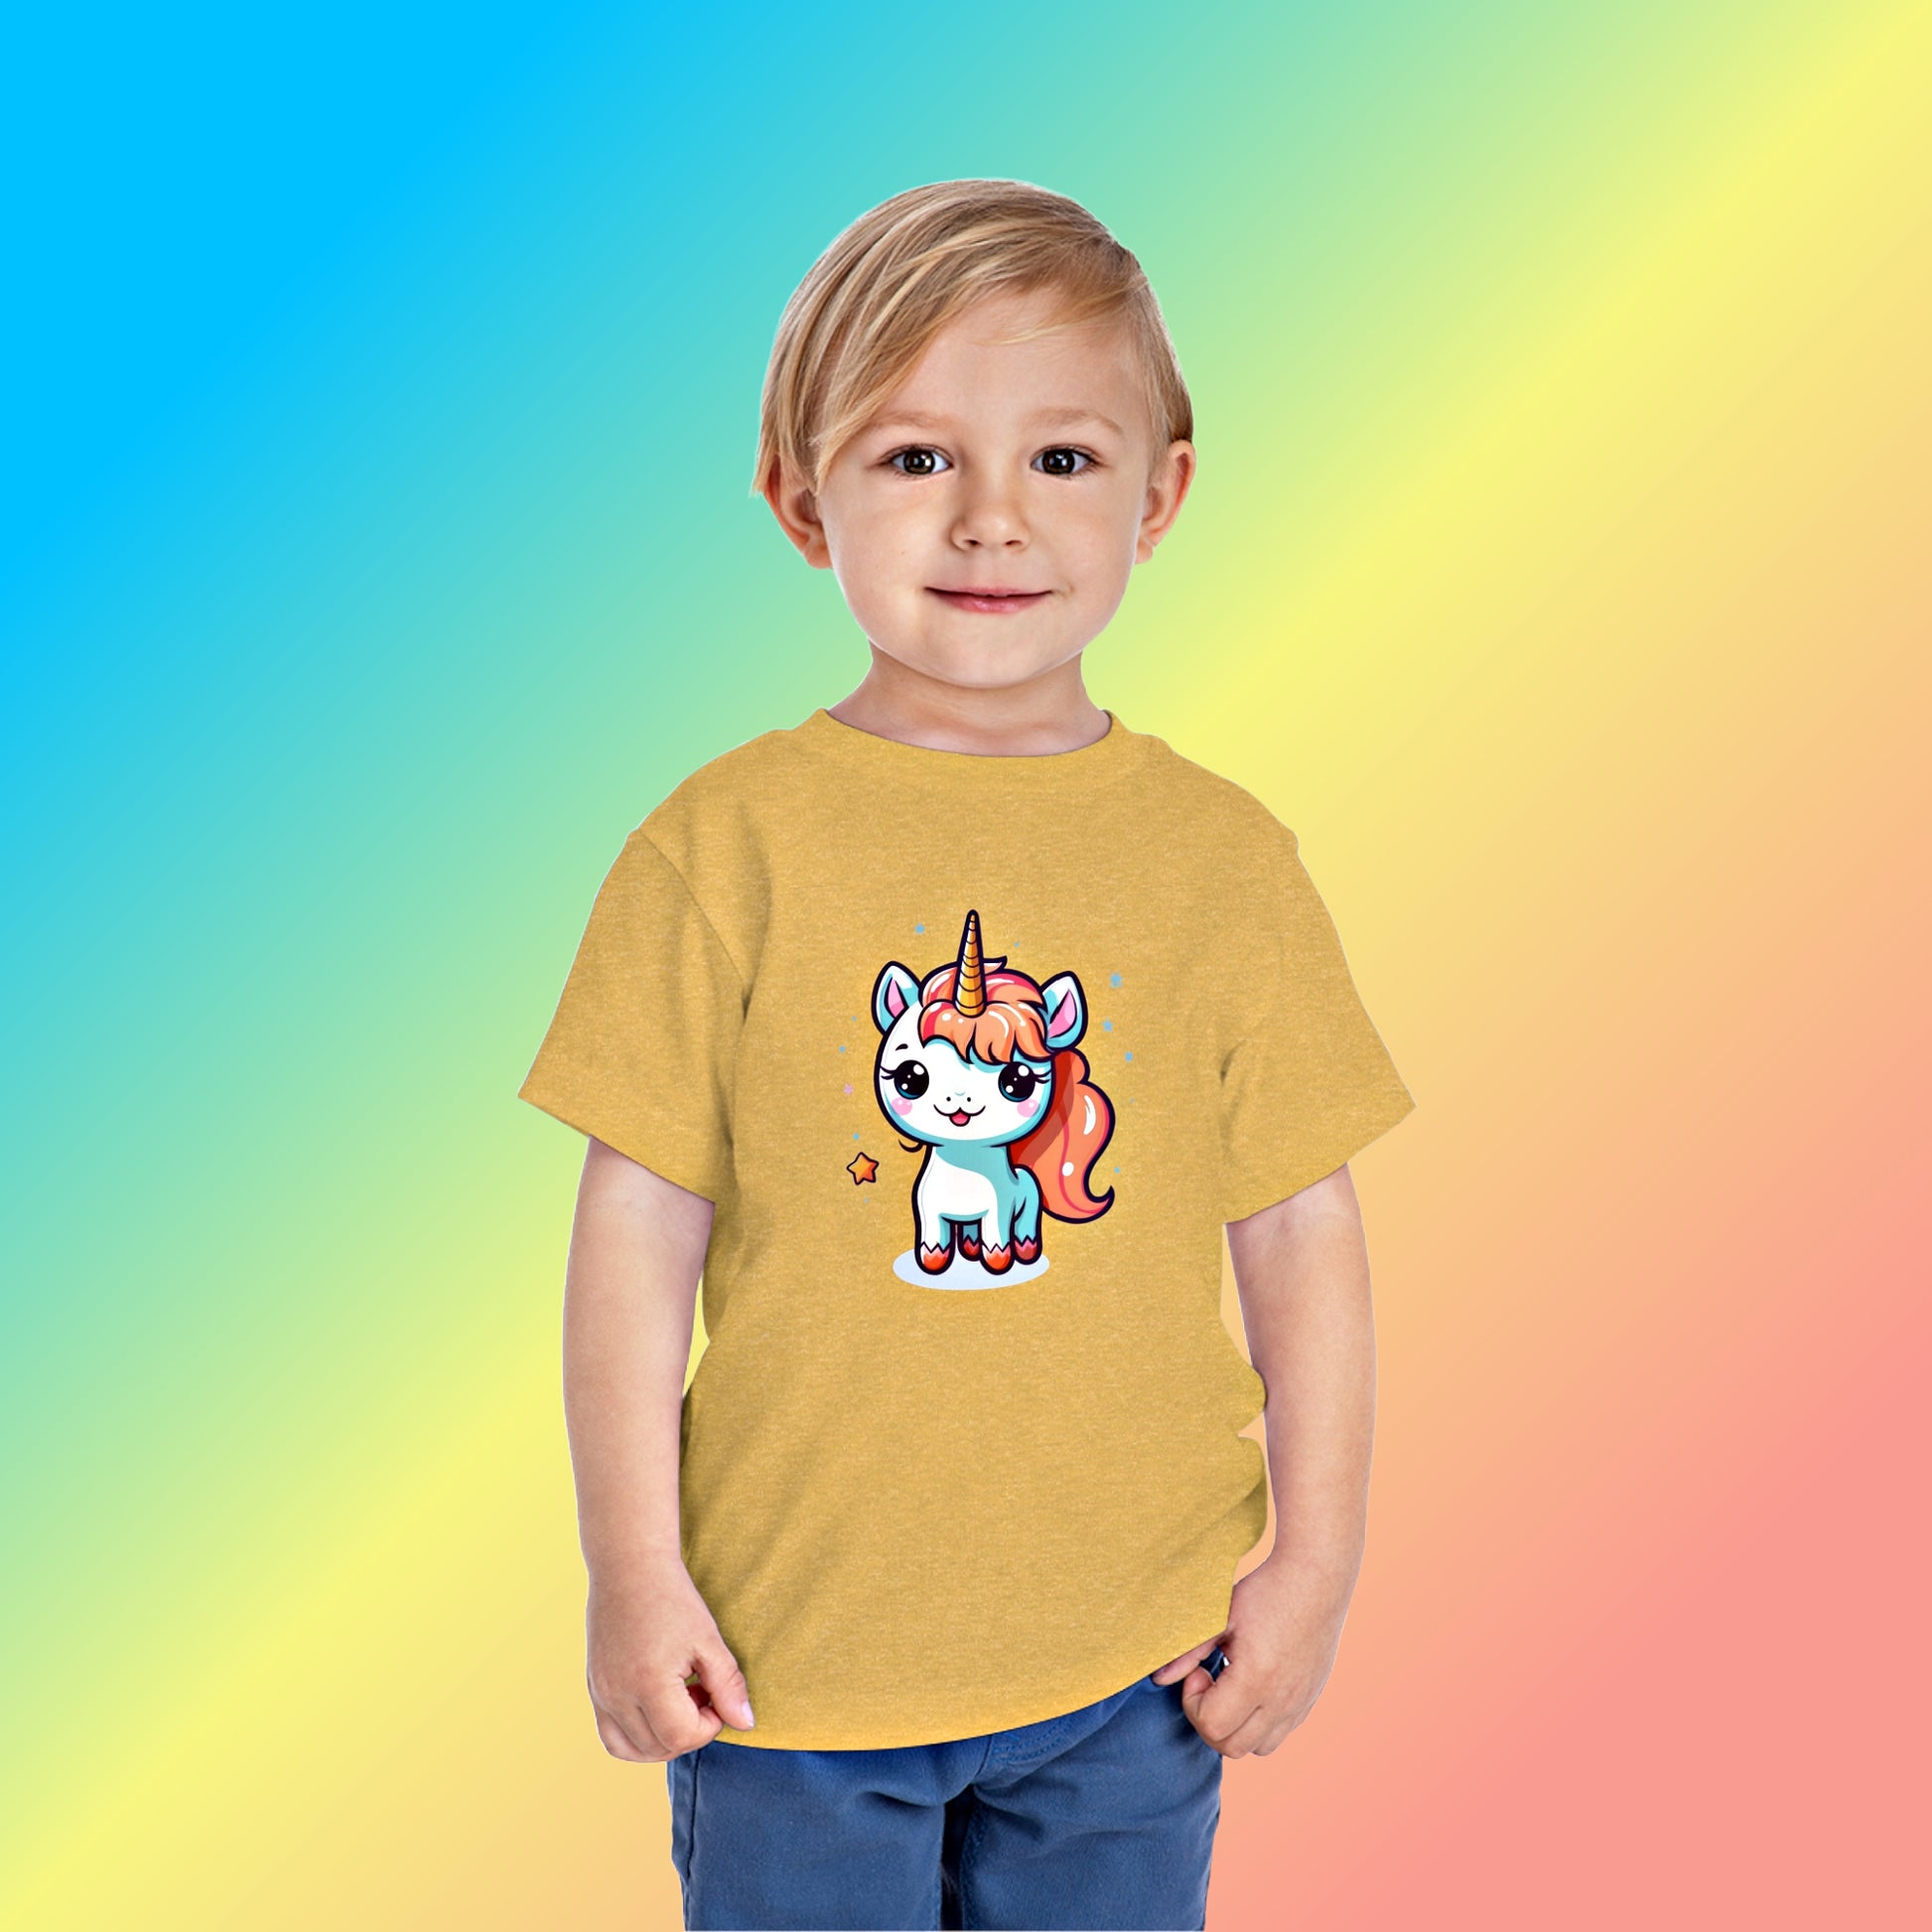 Mock up of a blonde-haired child wearing the Heather Yellow Gold t-shirt